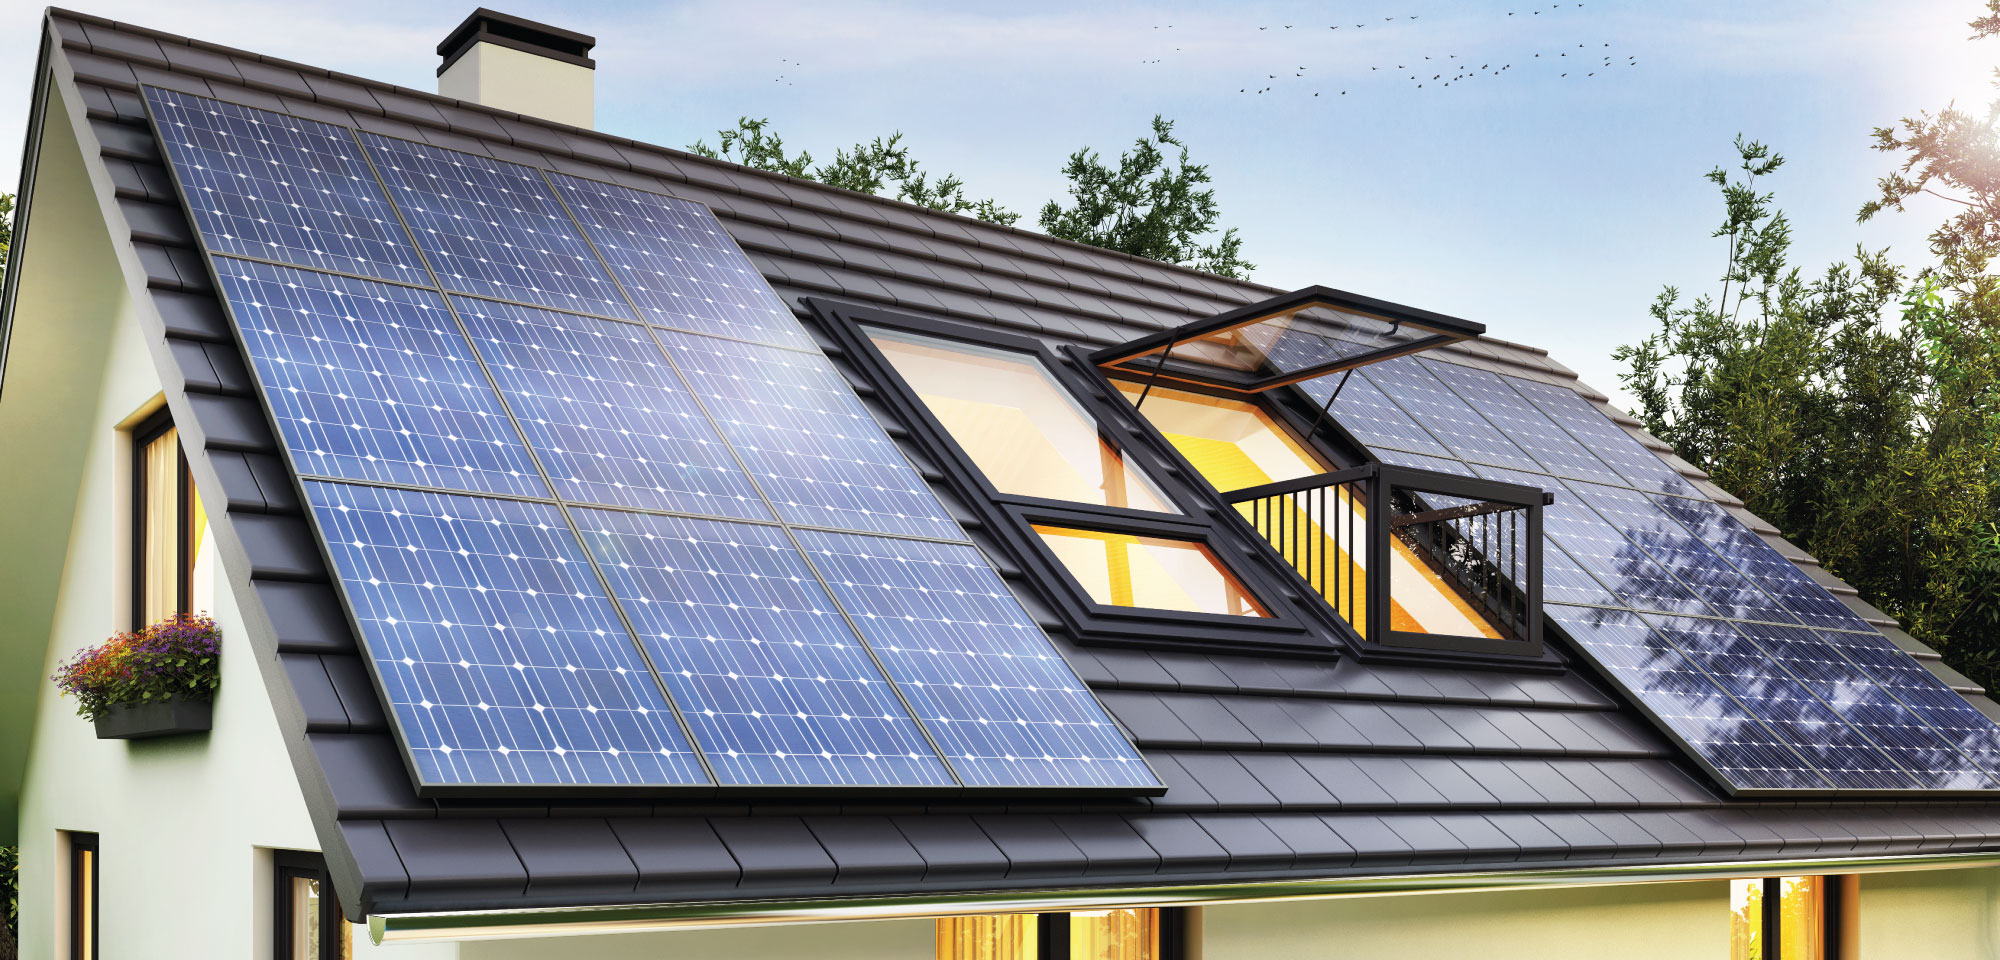 Solar heating systems and the art of minimizing electricity bills